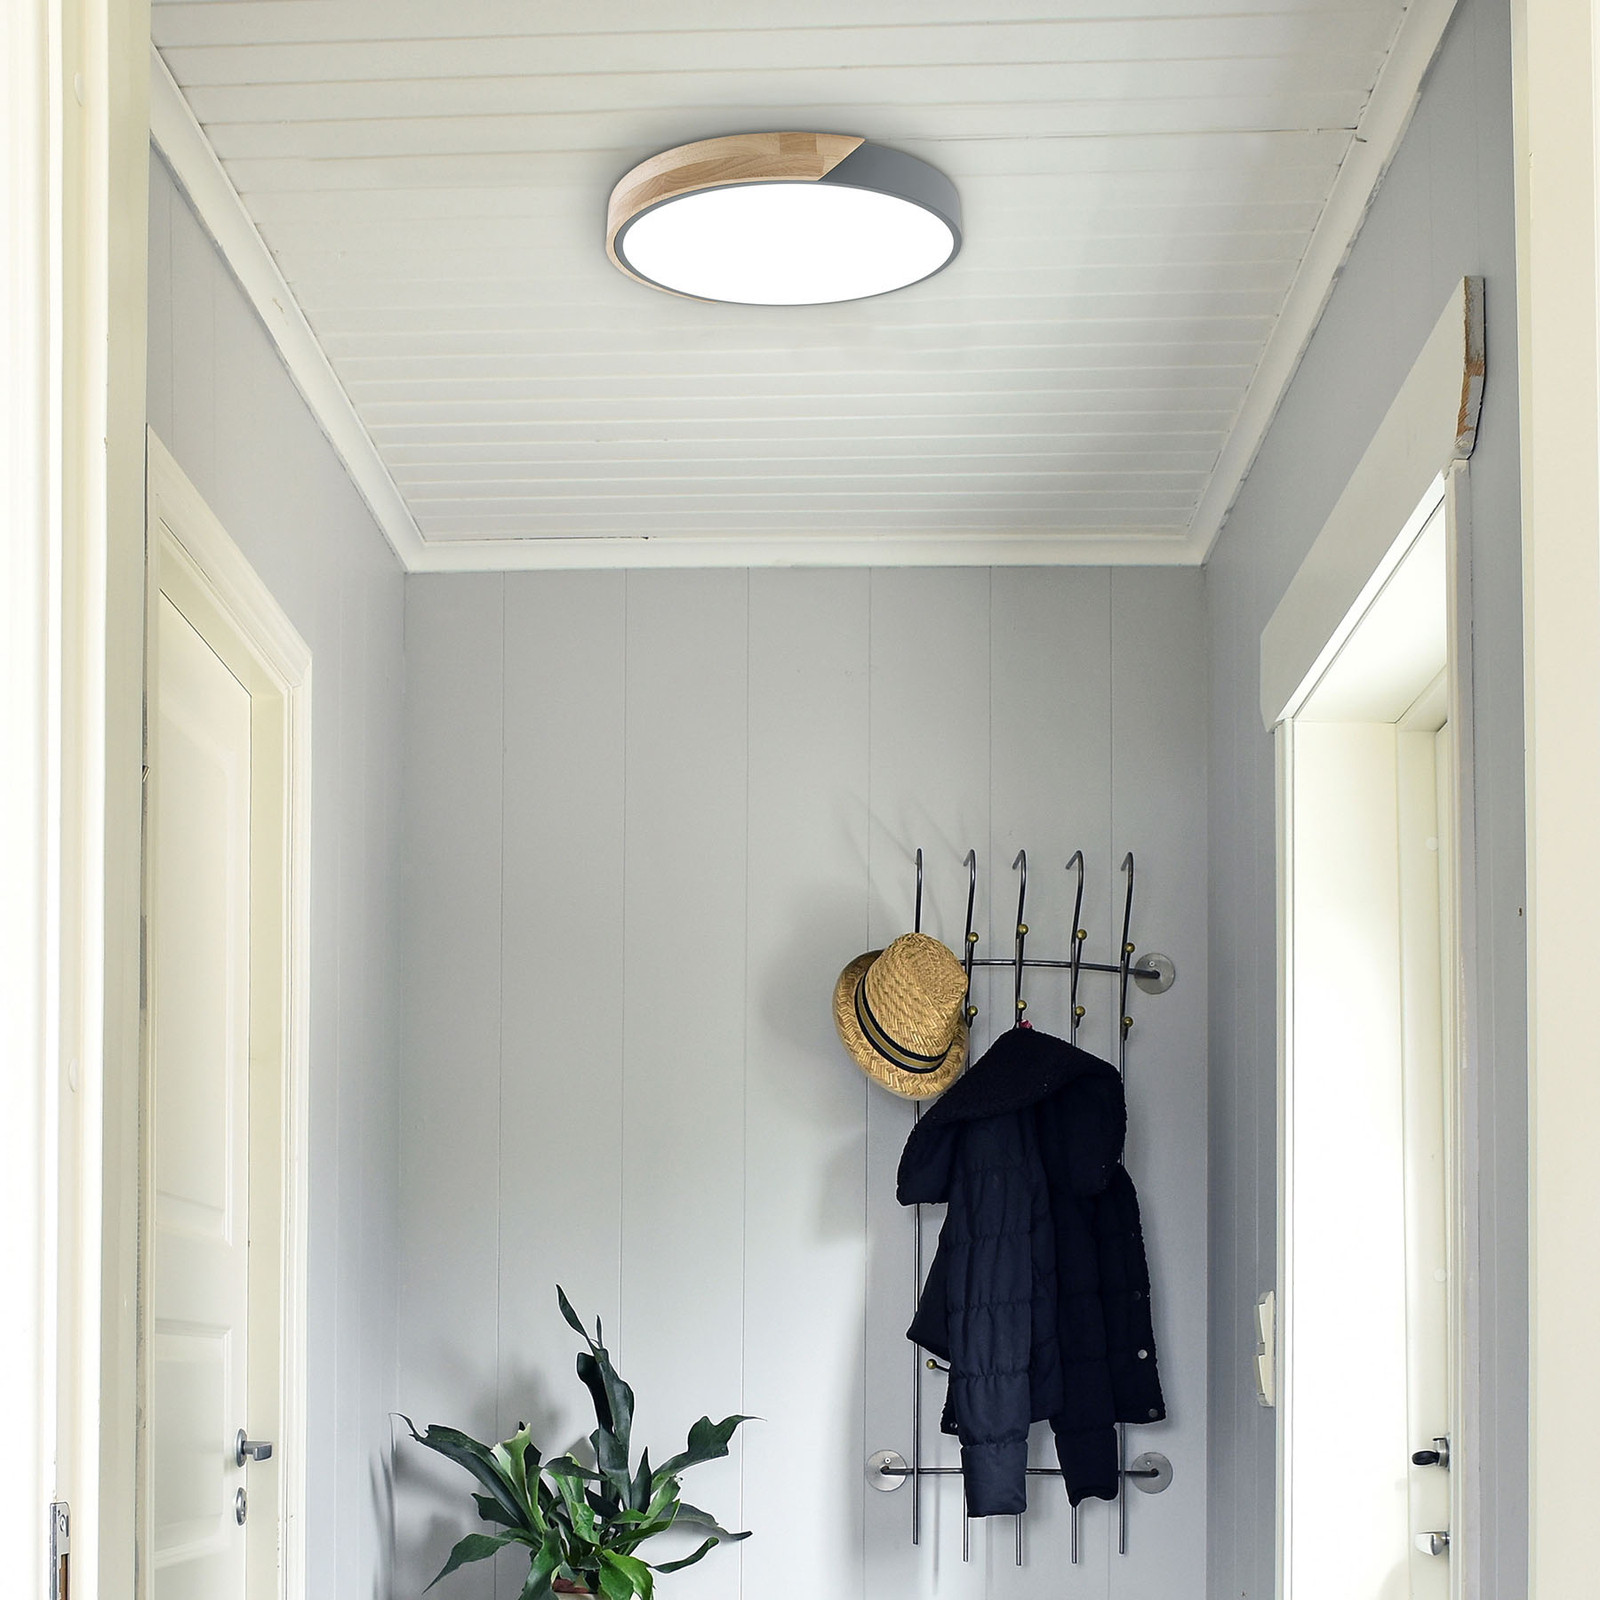 Borneo LED ceiling light with wooden frame